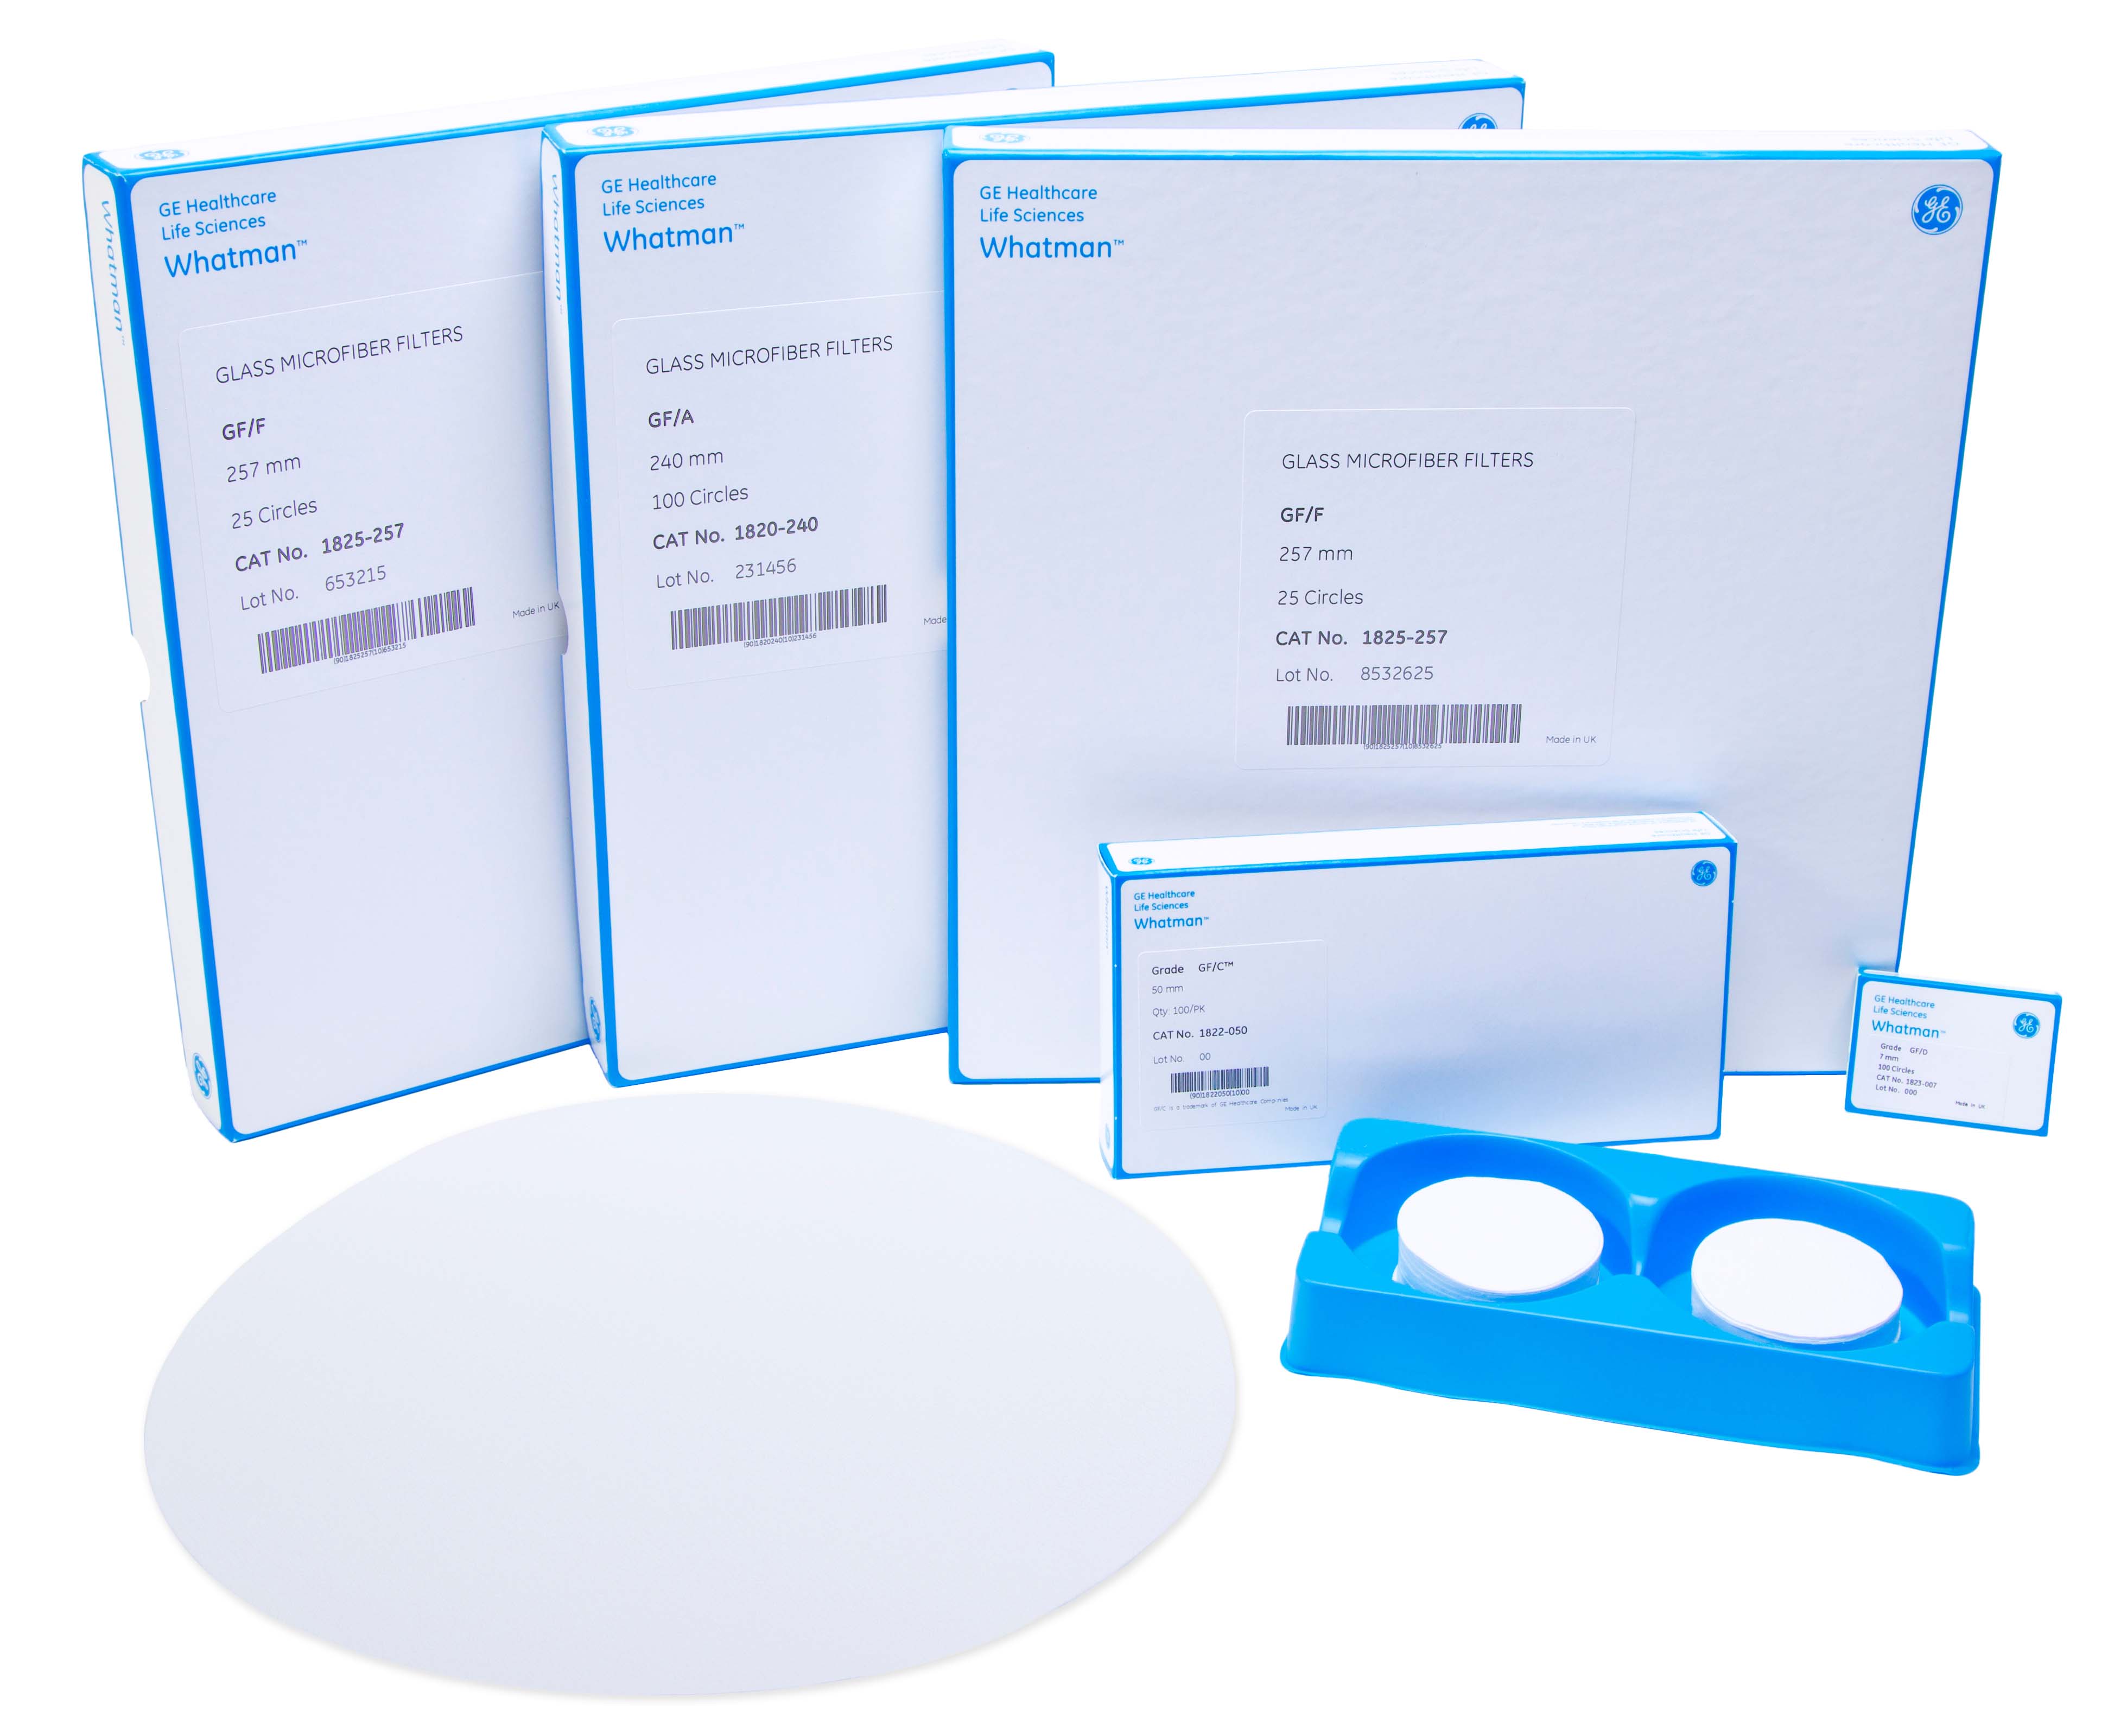 Whatman Glass Microfiber Filter Papers